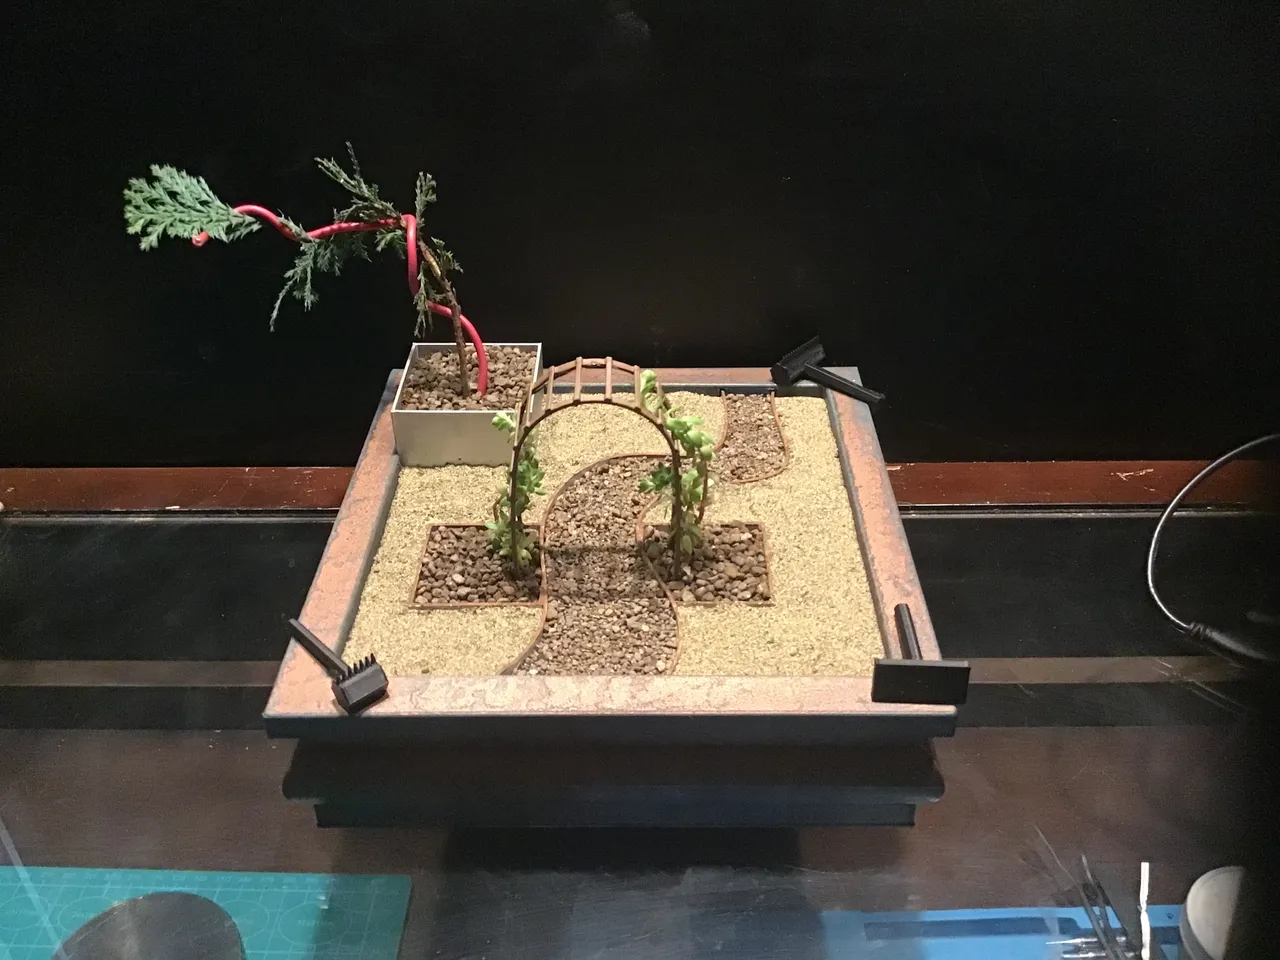 Large Zen Garden with Bonsai tree and small plant pots and drip